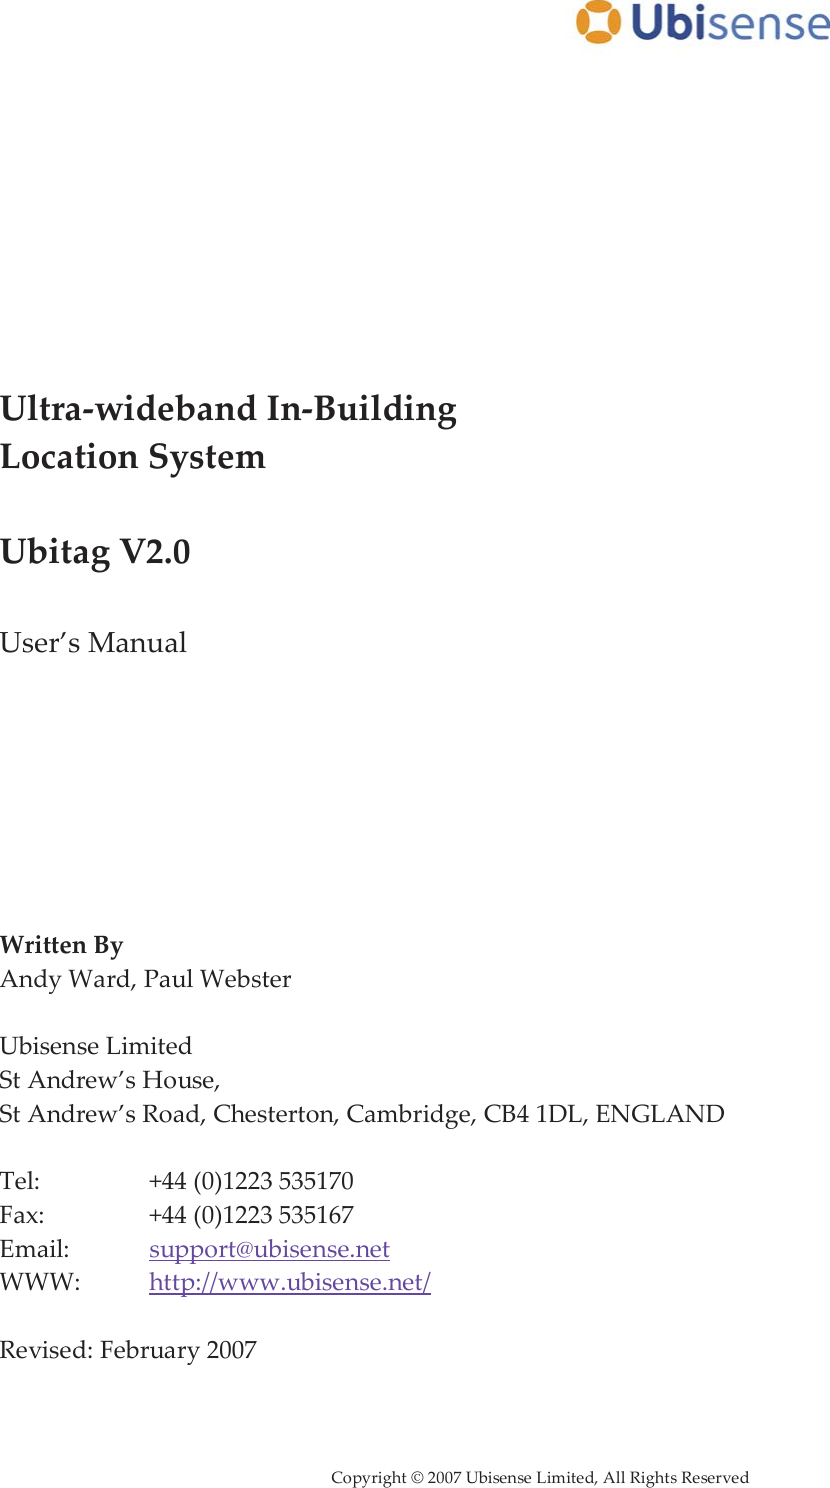     Copyright © 2007 Ubisense Limited, All Rights Reserved            Ultra-wideband In-Building Location System  Ubitag V2.0  User’s Manual         Written By Andy Ward, Paul Webster  Ubisense Limited St Andrew’s House,  St Andrew’s Road, Chesterton, Cambridge, CB4 1DL, ENGLAND  Tel:     +44 (0)1223 535170 Fax:     +44 (0)1223 535167 Email:    support@ubisense.net WWW:   http://www.ubisense.net/  Revised: February 2007